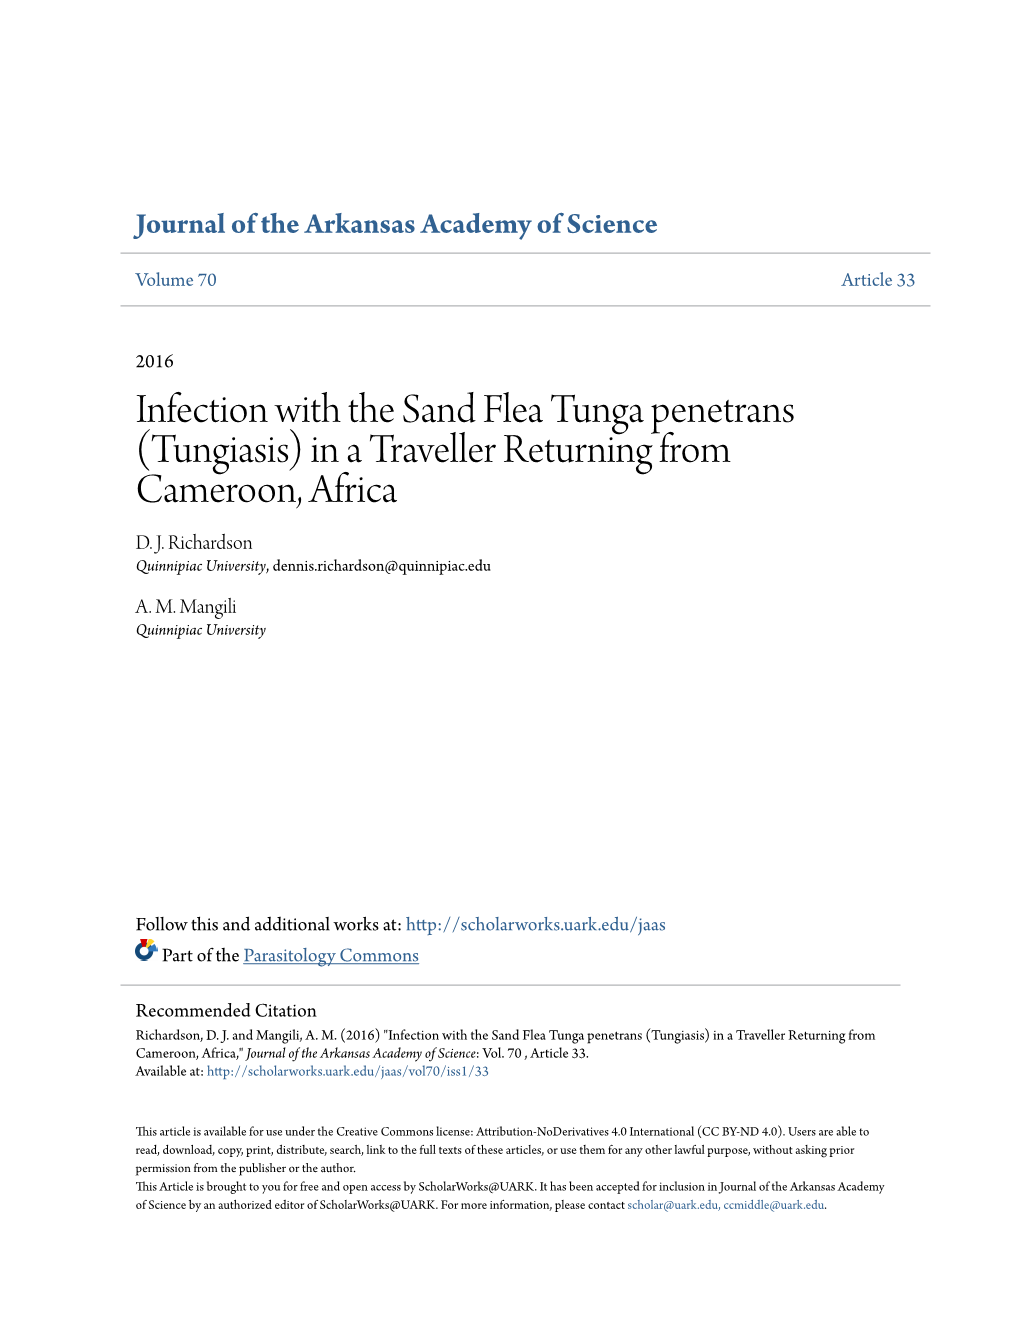 Infection with the Sand Flea Tunga Penetrans (Tungiasis) in a Traveller Returning from Cameroon, Africa D